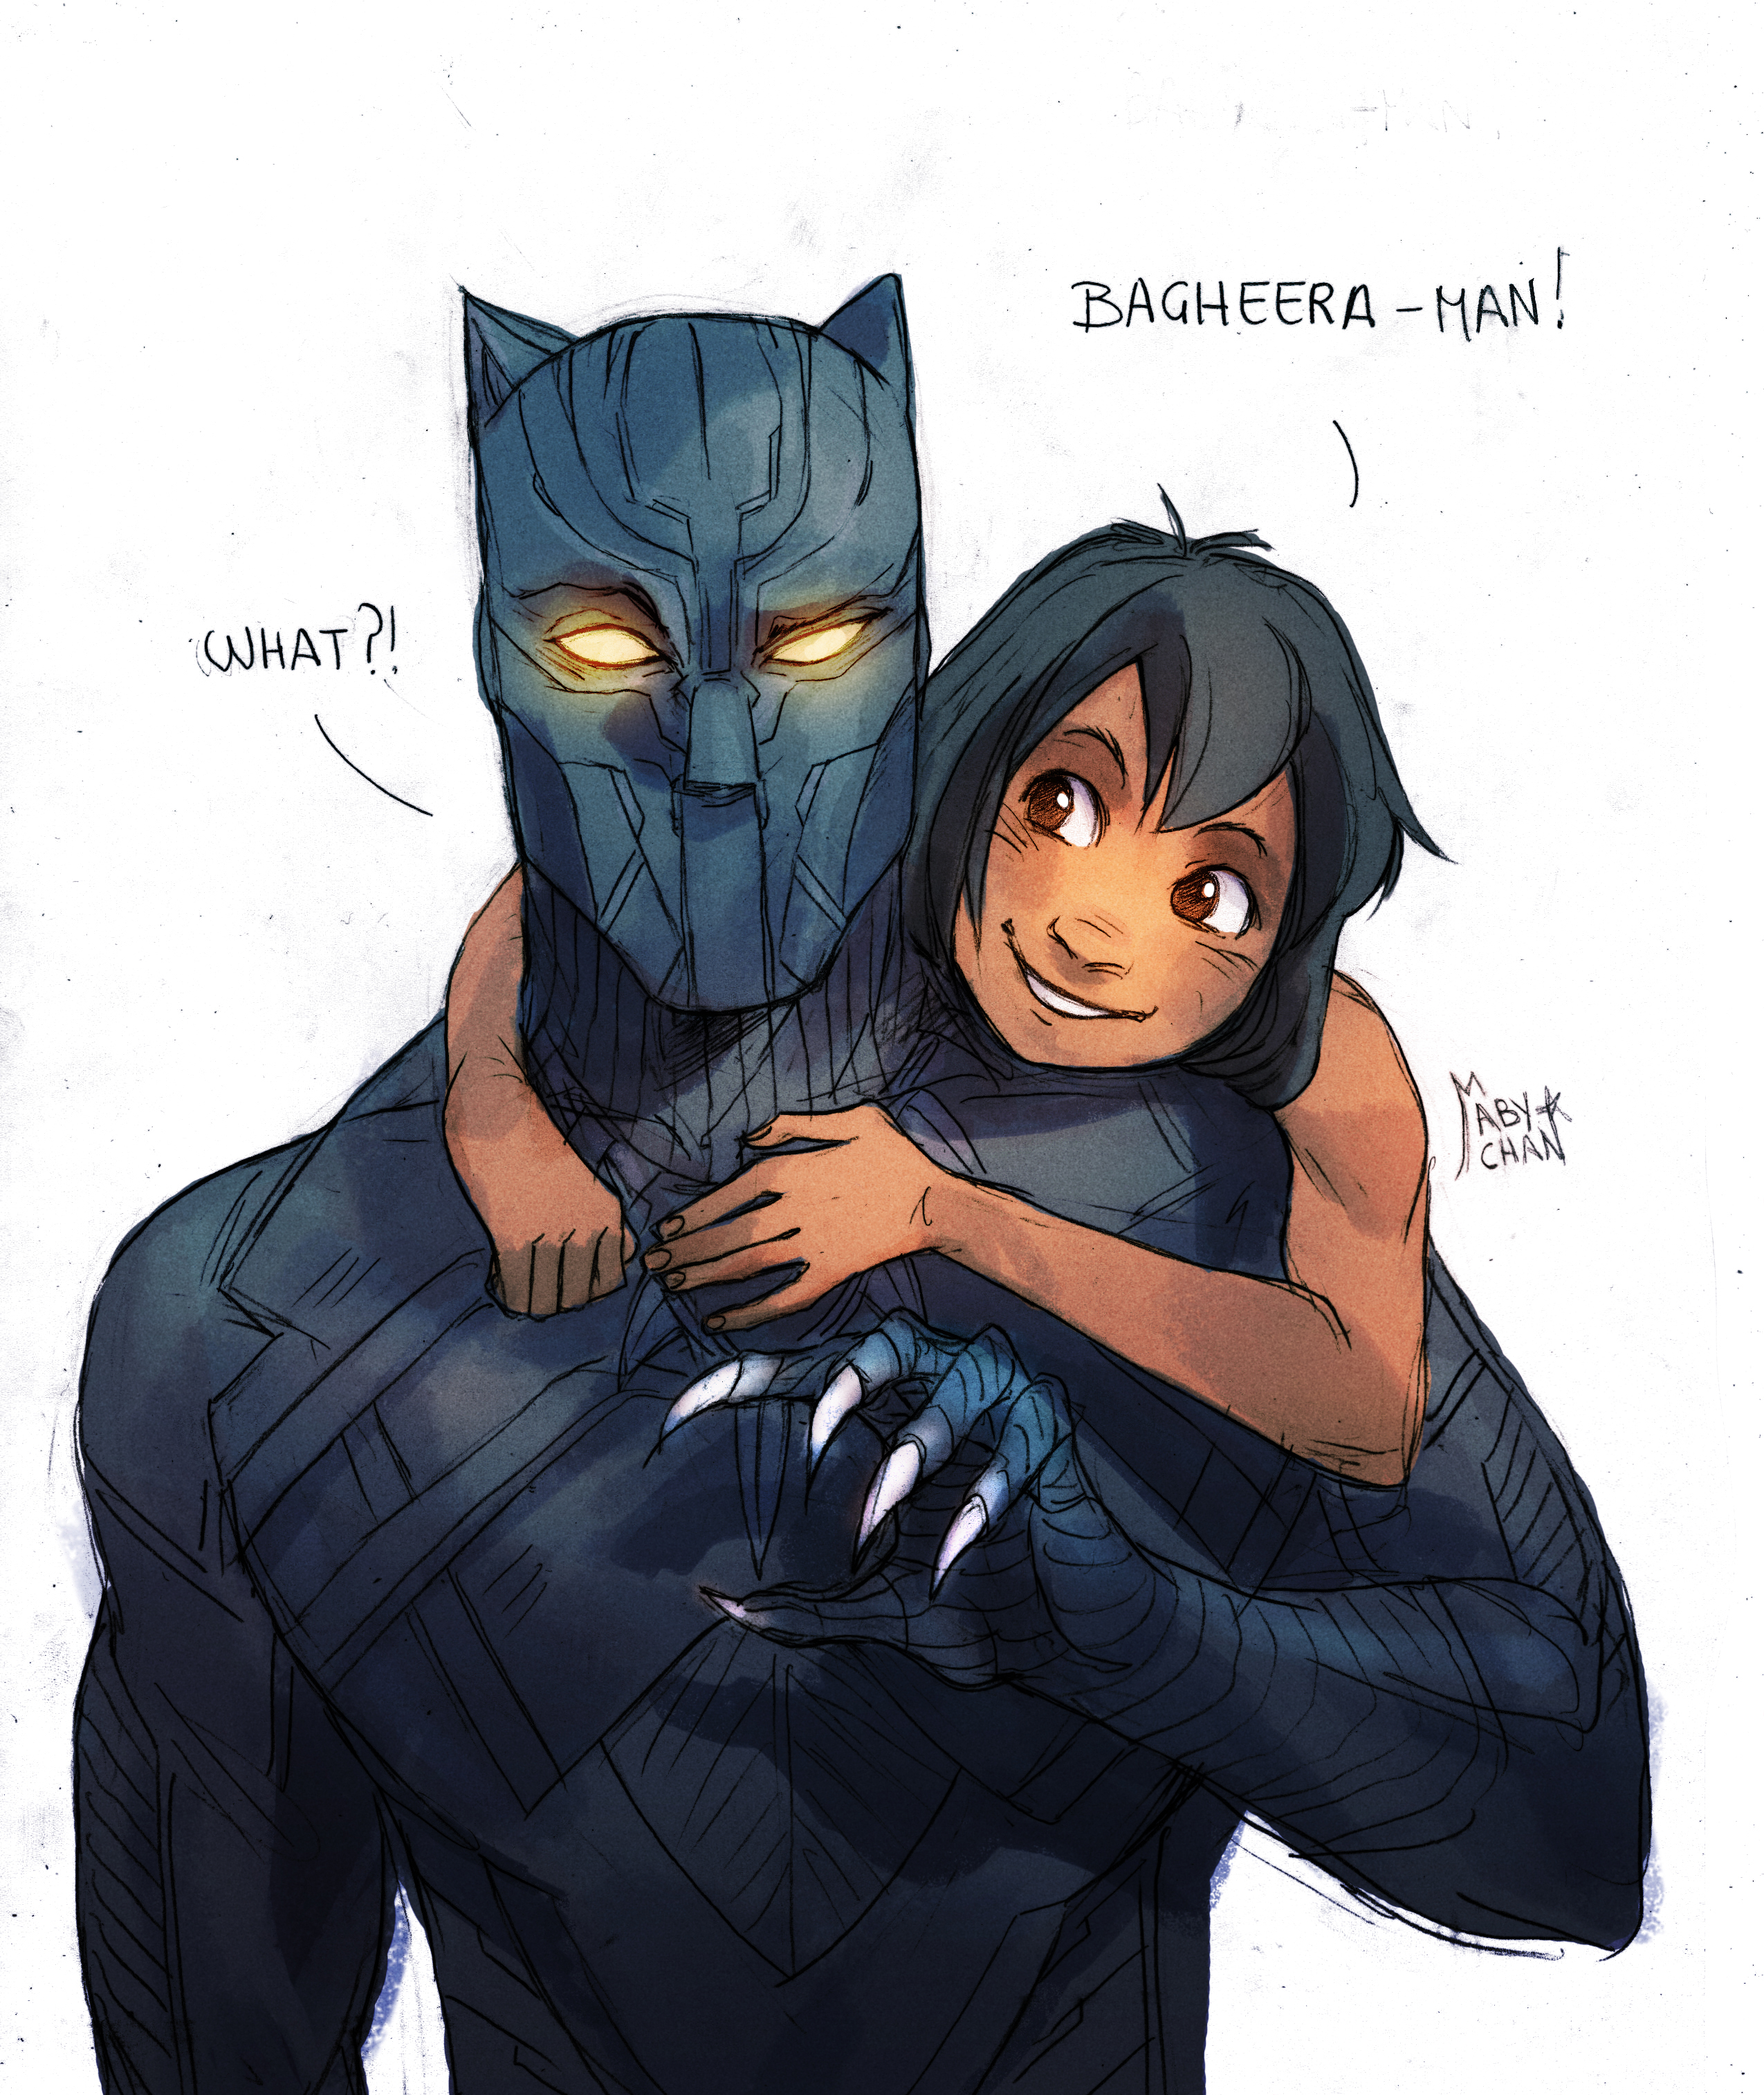 black_panther_and_mowgli_by_maby_chan-d9tlaqh.jpg